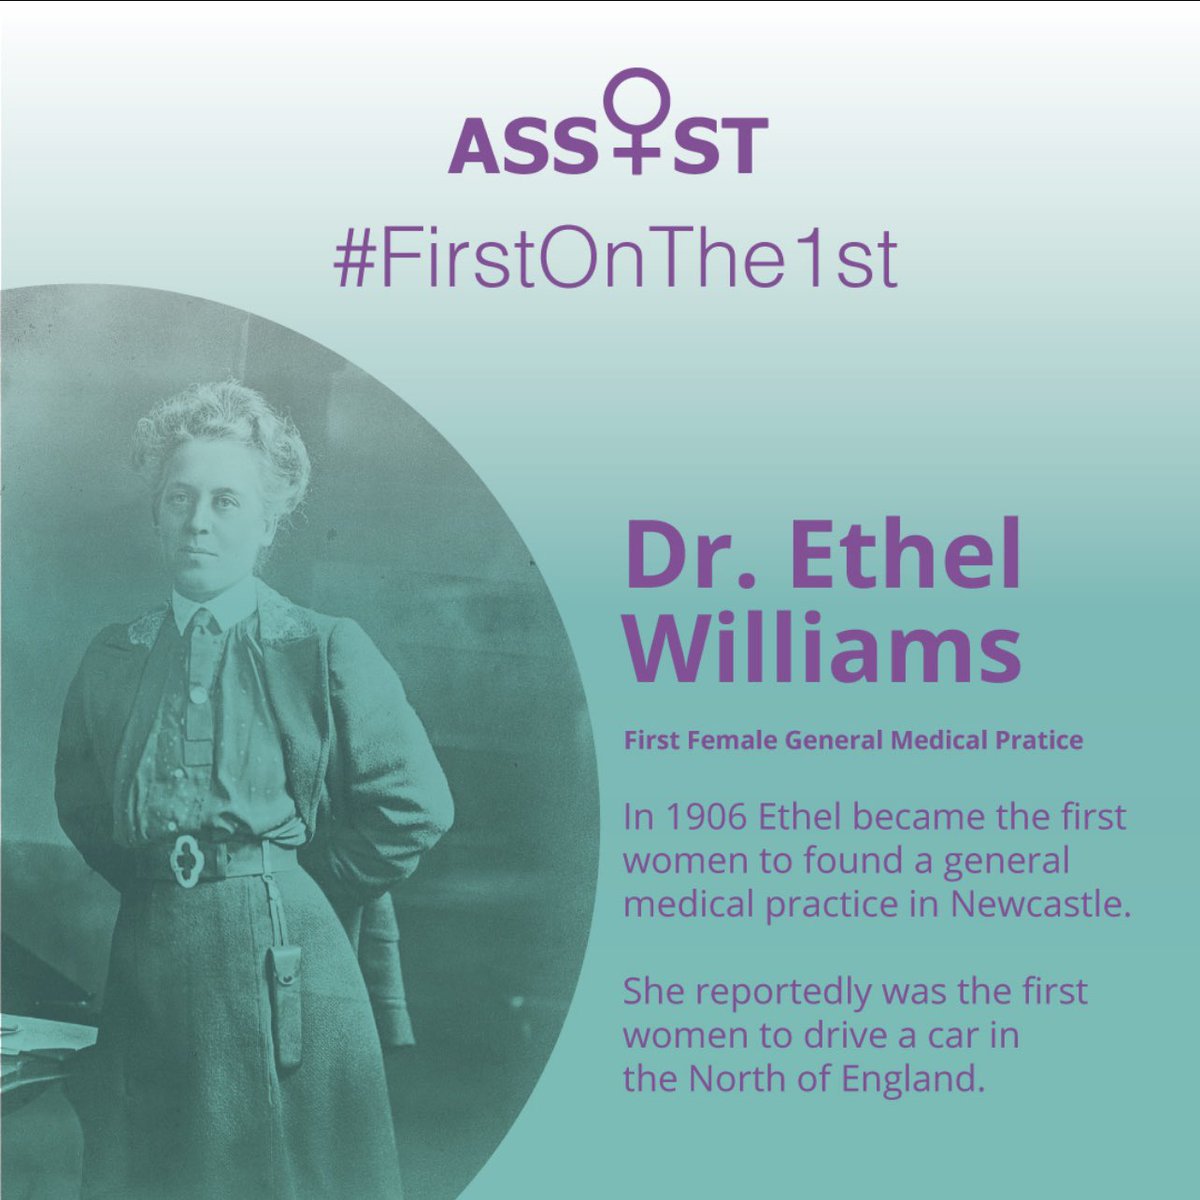 Happy February! 

This months #firstonthe1st honours Dr Ethel Williams, who paved the way for women in the medical field by being the first woman to open a general medical practice in Newcastle ⭐️💜